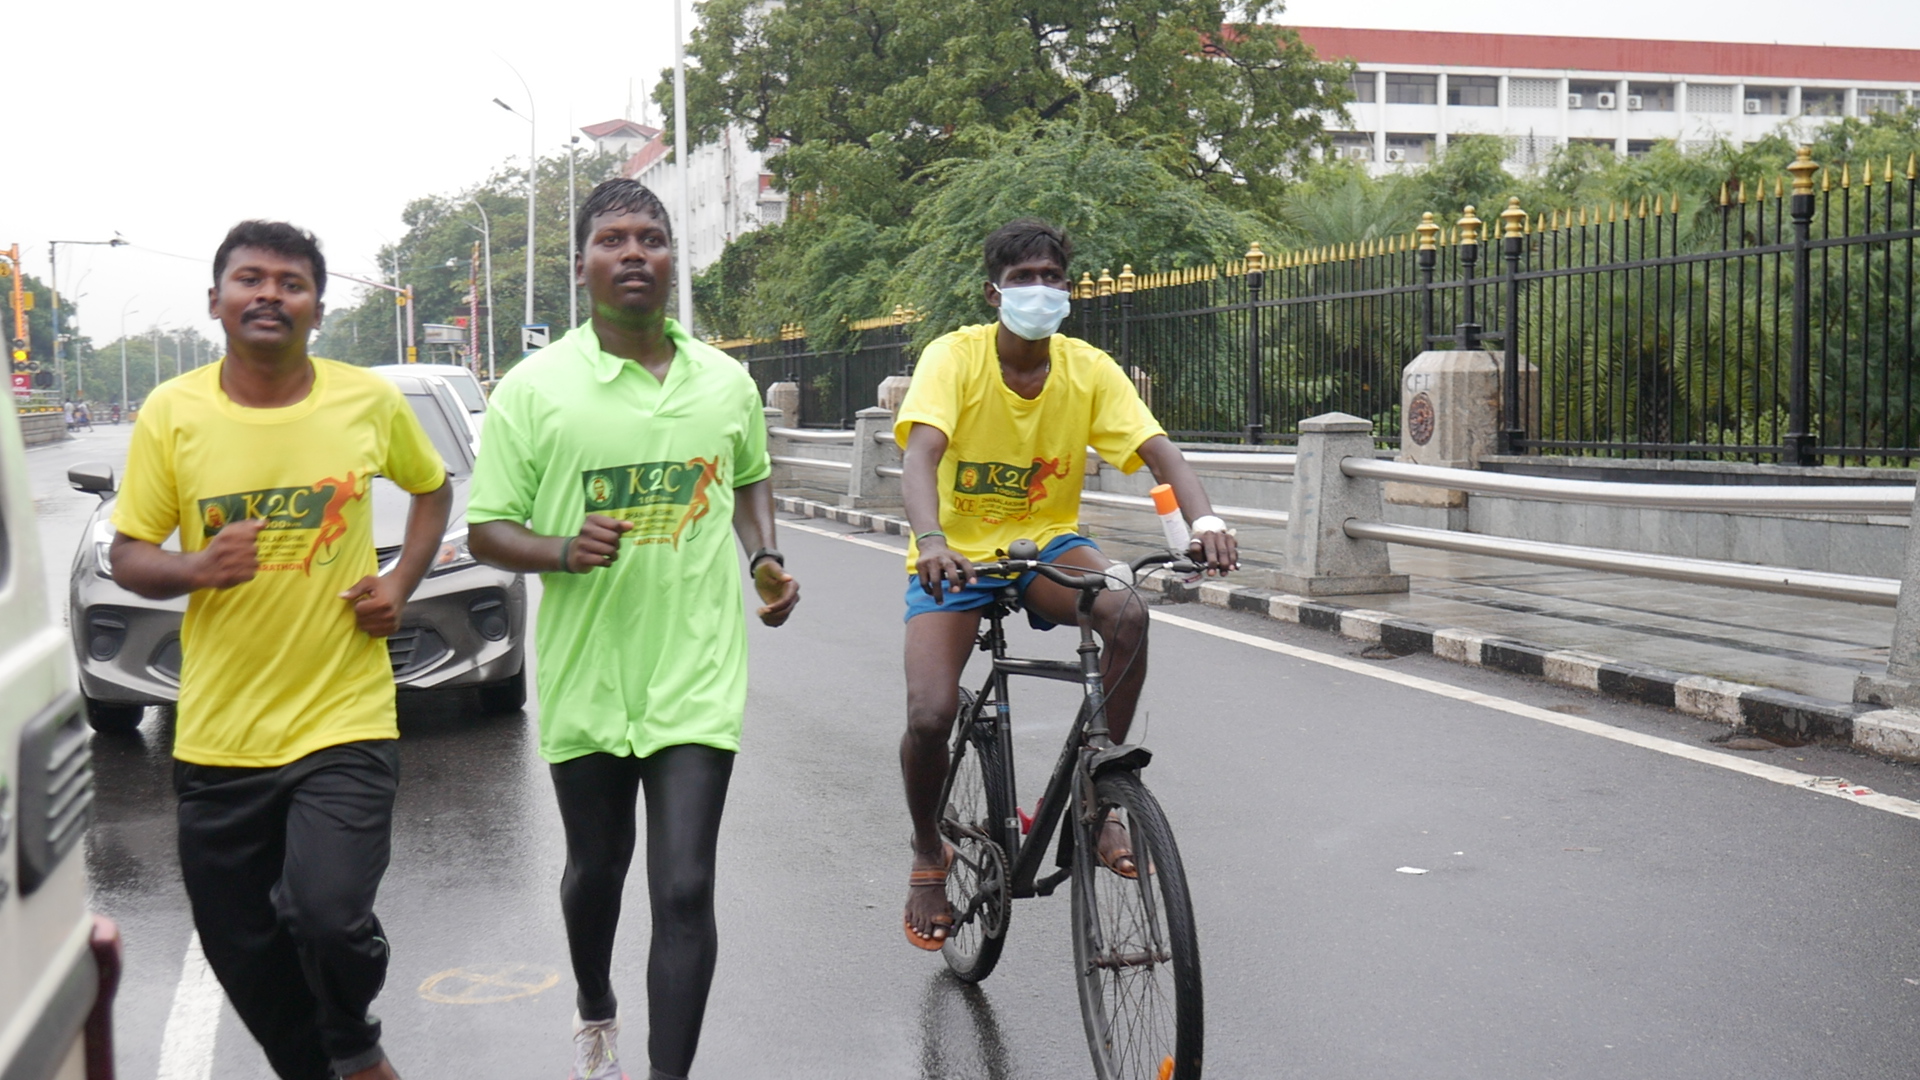 1000km of Marathon Running for Express Gratitude  to Tamilnadu Government and frontline warriors of COVID 19